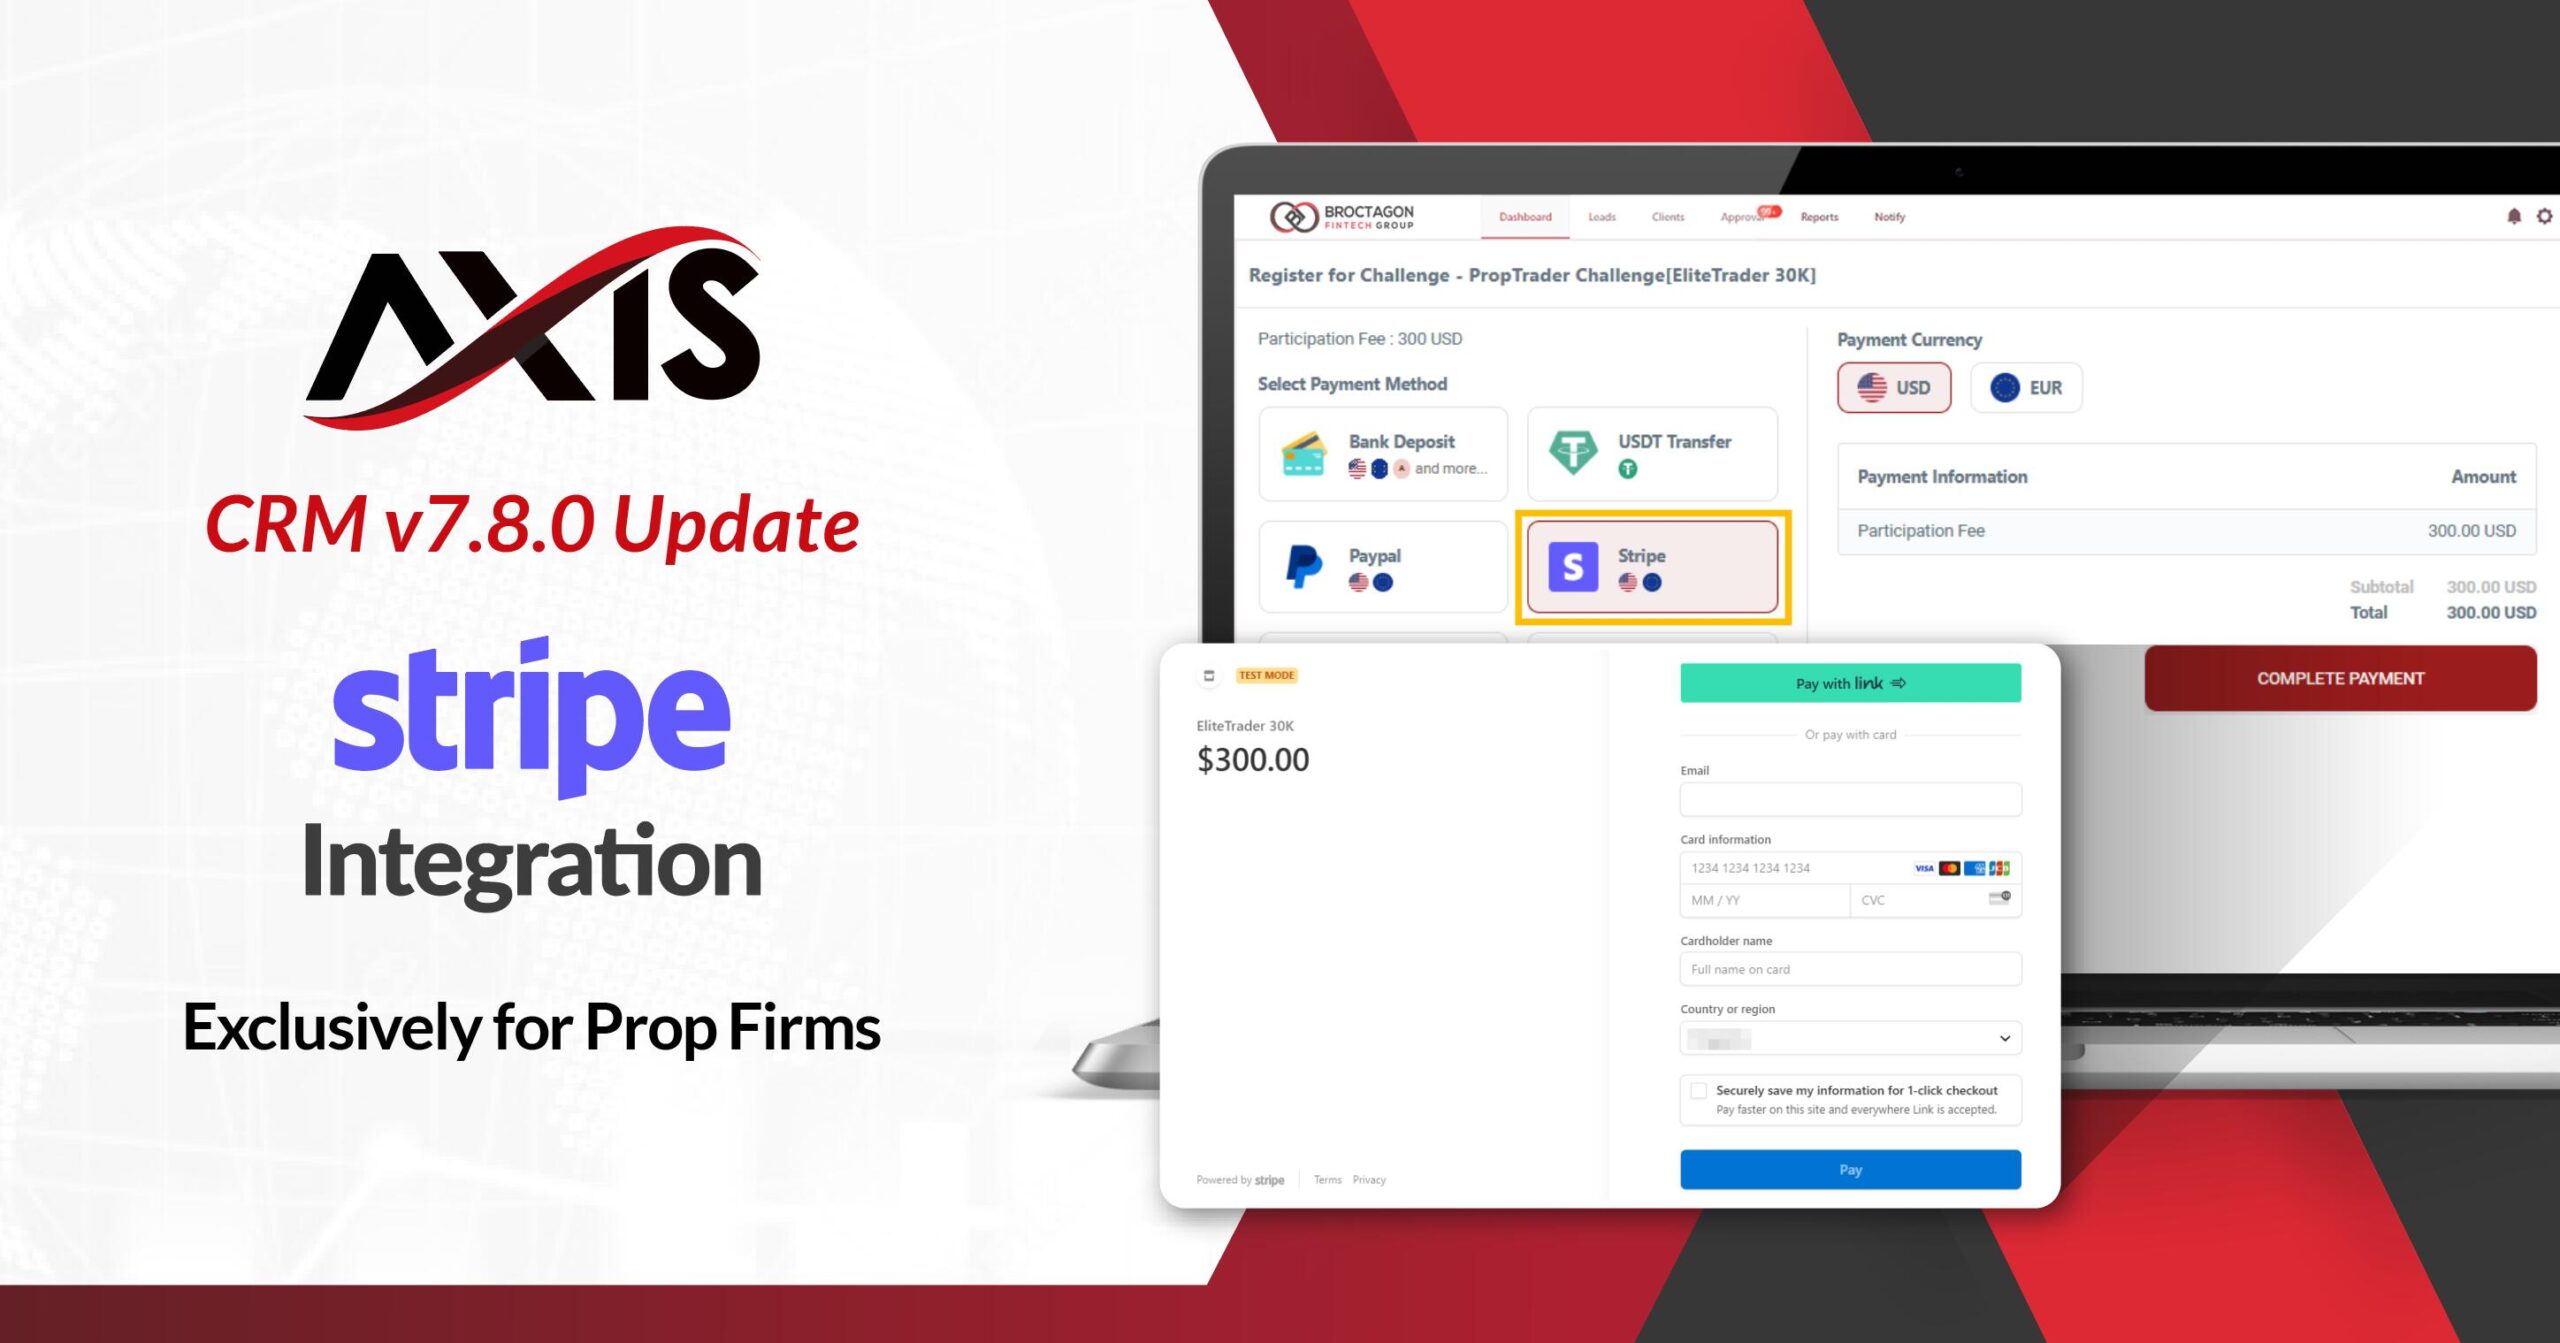 AXIS CRM v7.8.0 Update